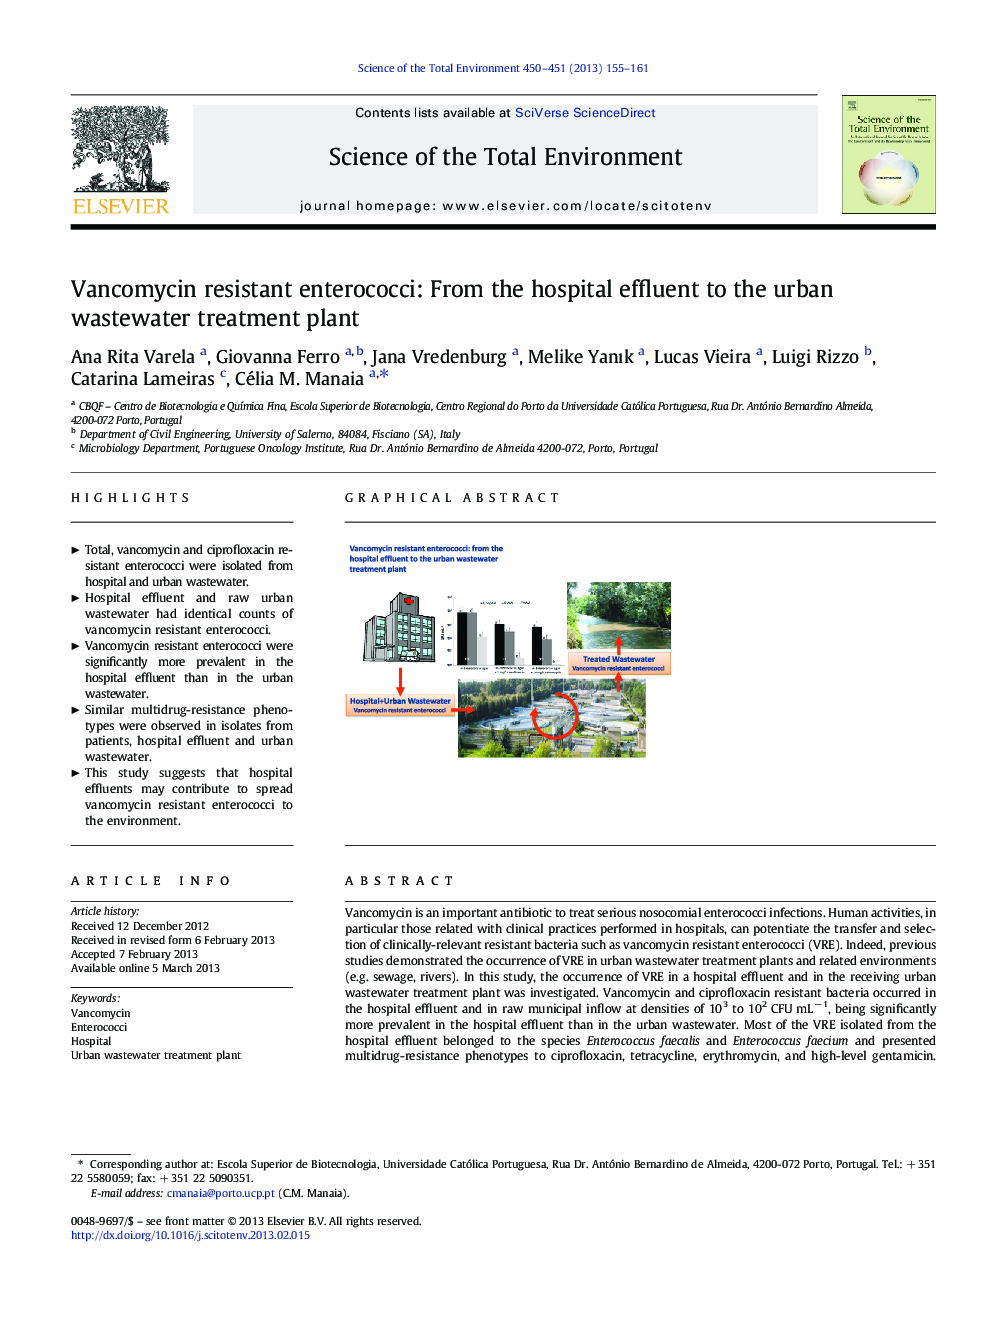 Vancomycin resistant enterococci: From the hospital effluent to the urban wastewater treatment plant